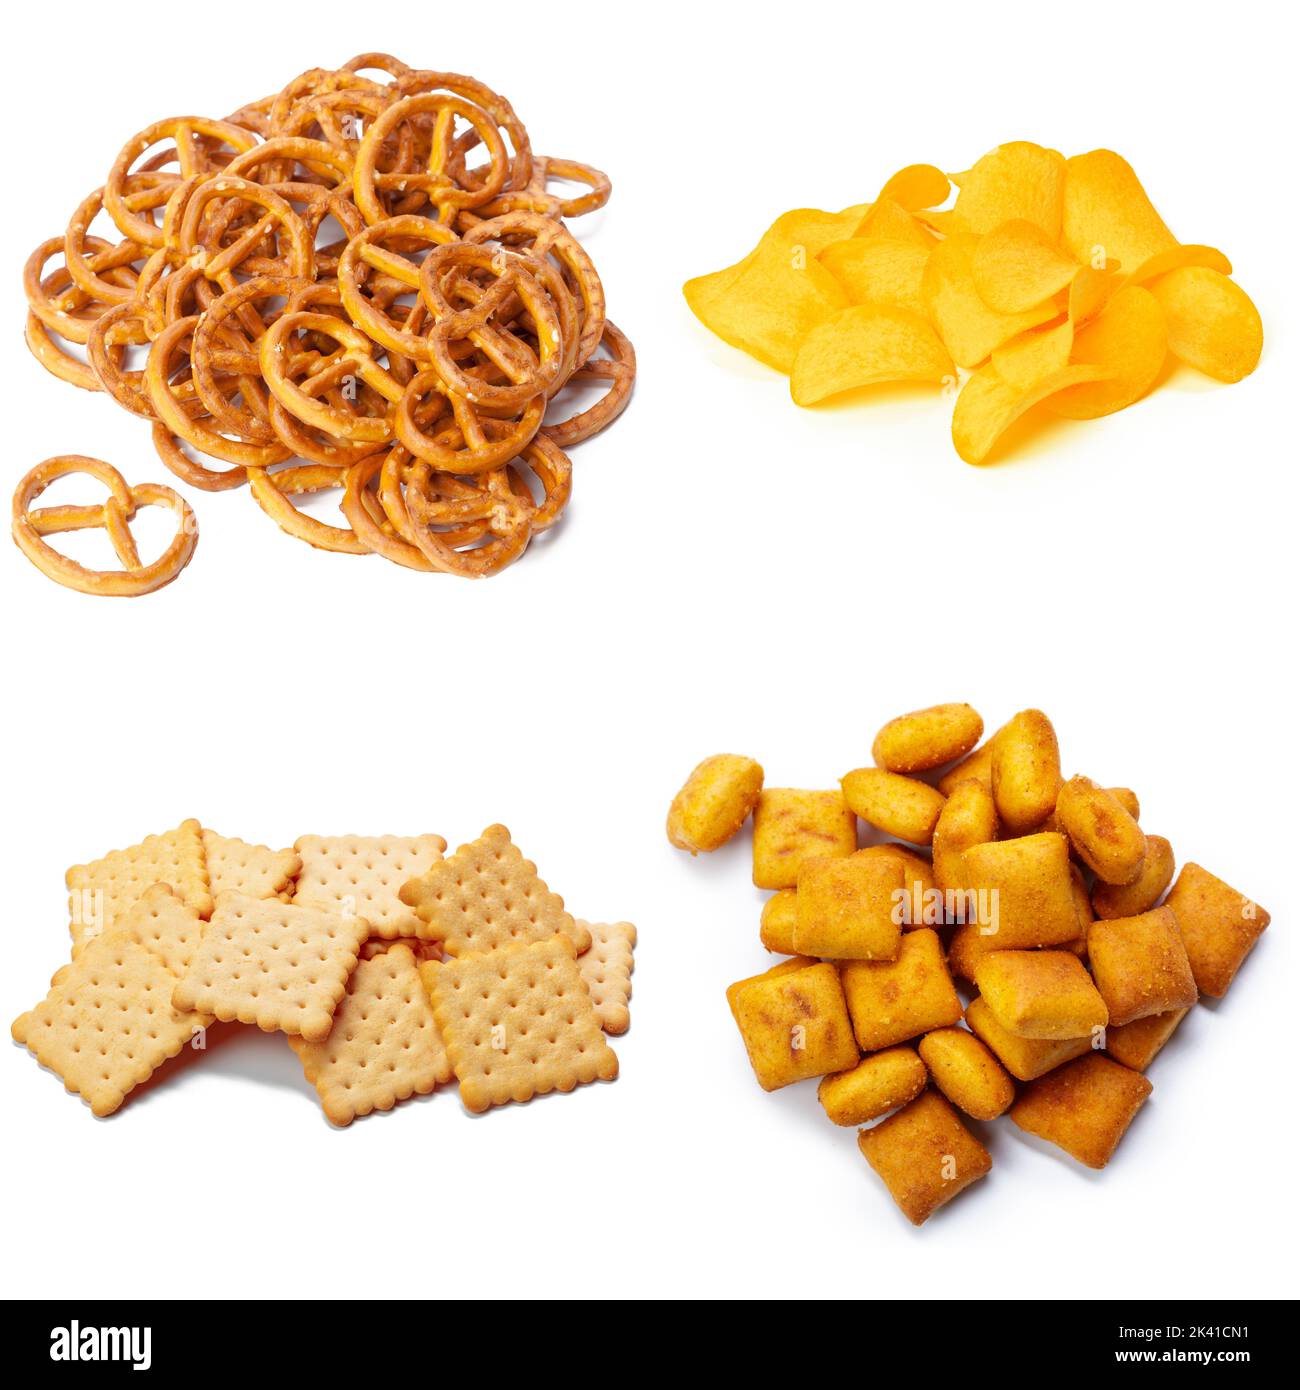 Salty Snacks Pretzels Chips Crackers Collage Stock Photo Alamy